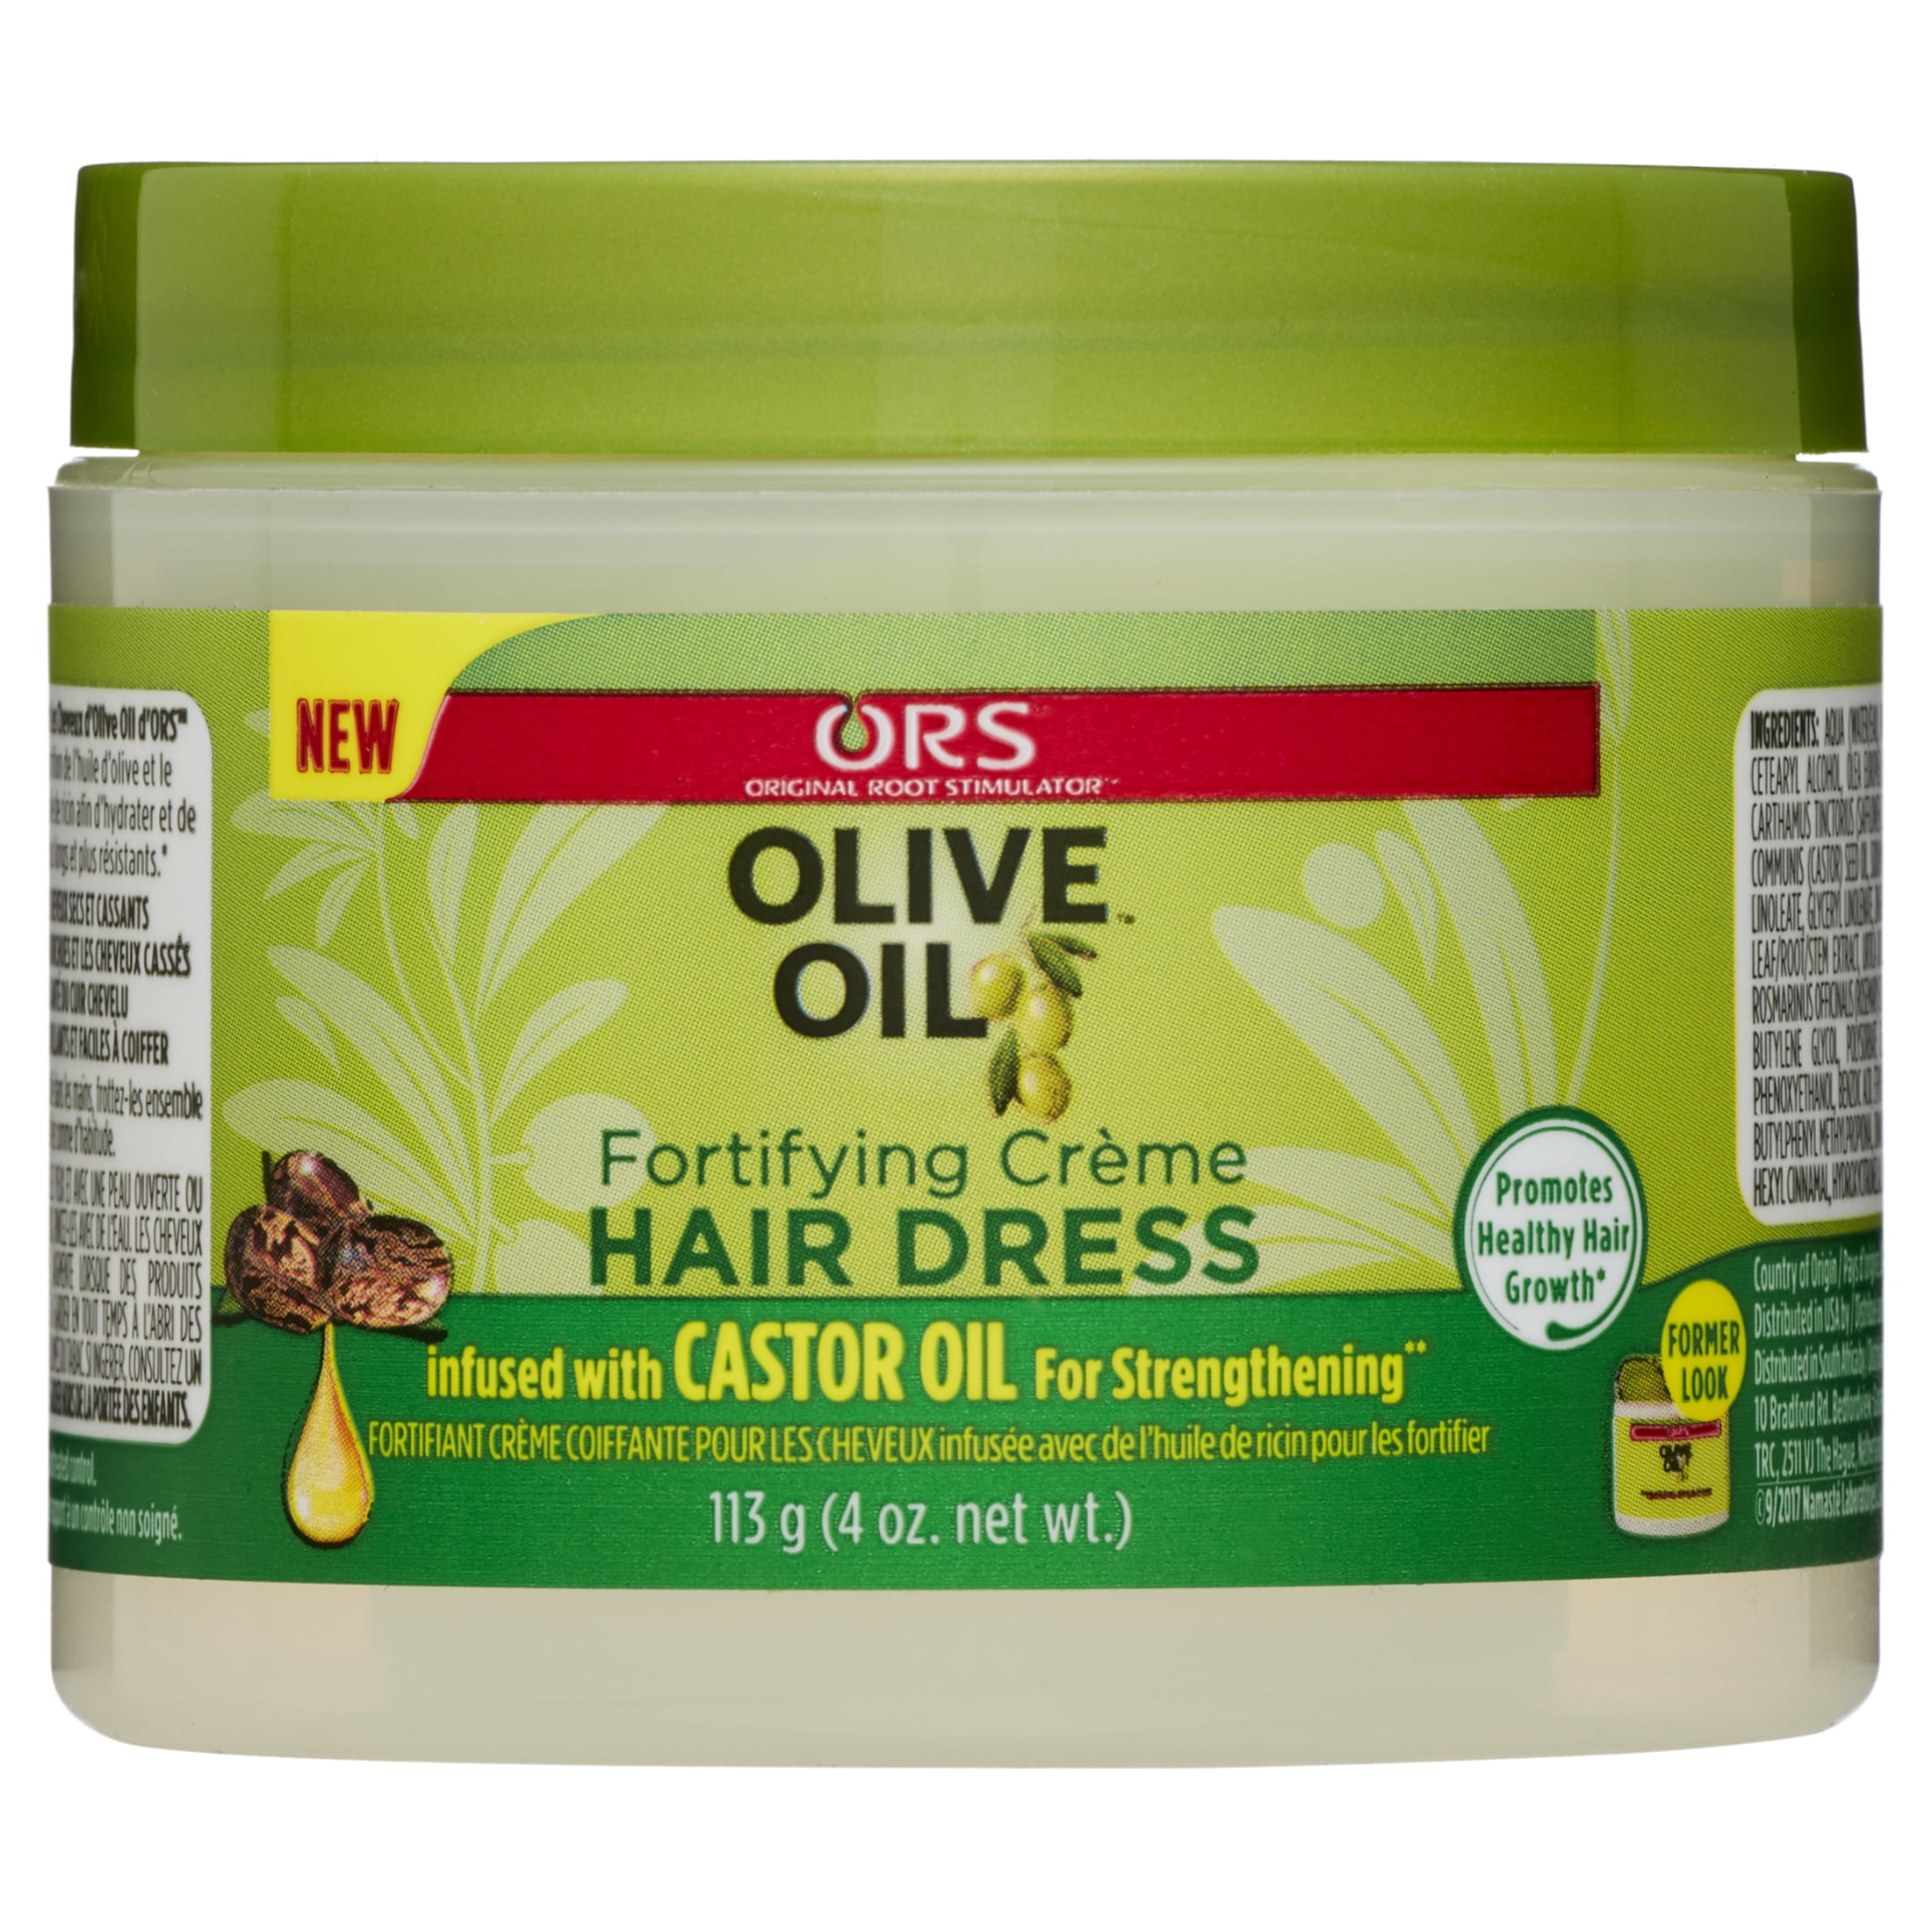 ORS Olive Oil Fortifying Crme Hair Dress infused with Castor Oil for Strengthening, 4 oz